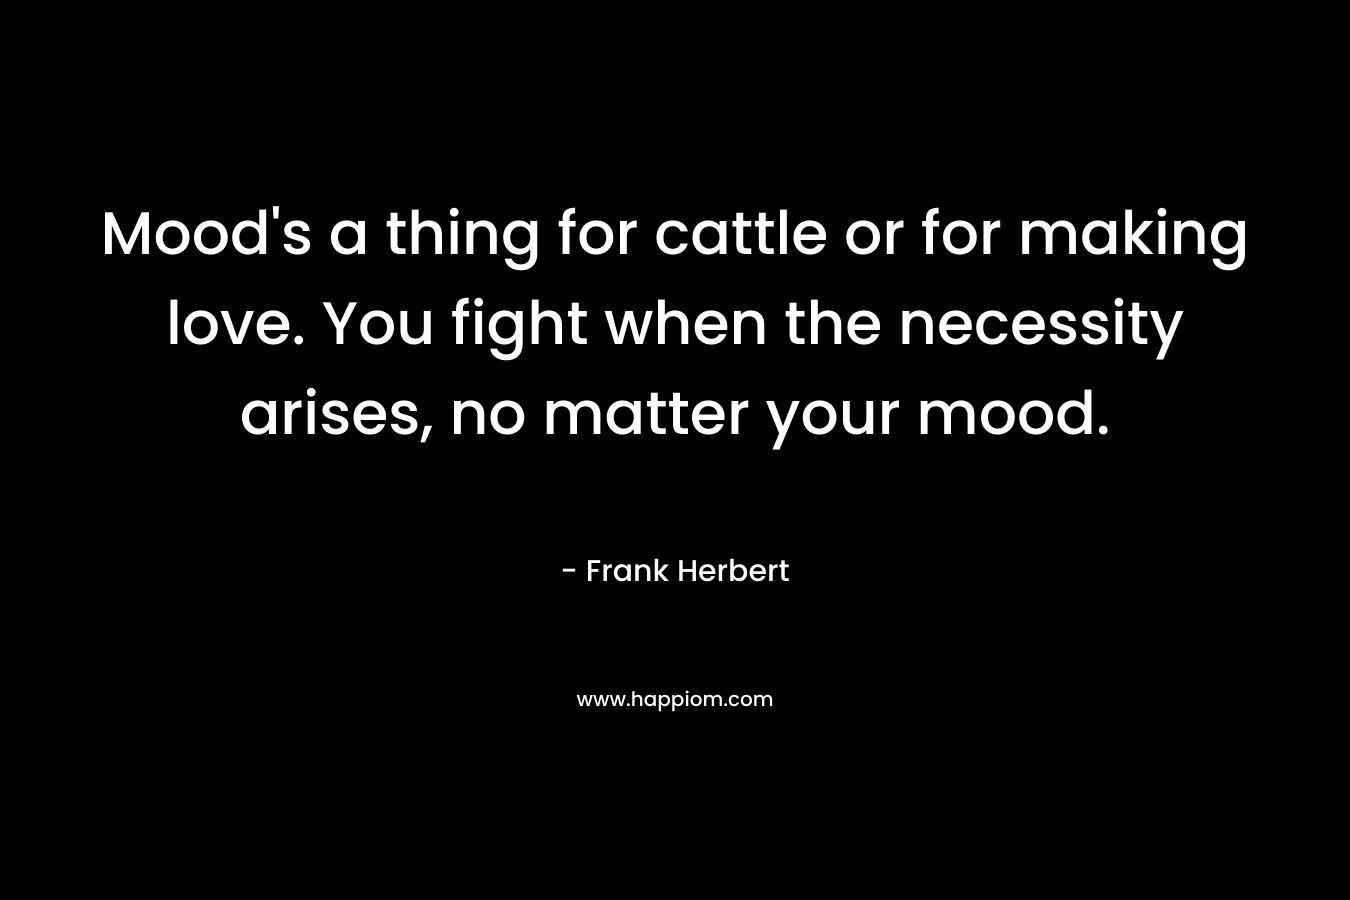 Mood's a thing for cattle or for making love. You fight when the necessity arises, no matter your mood.